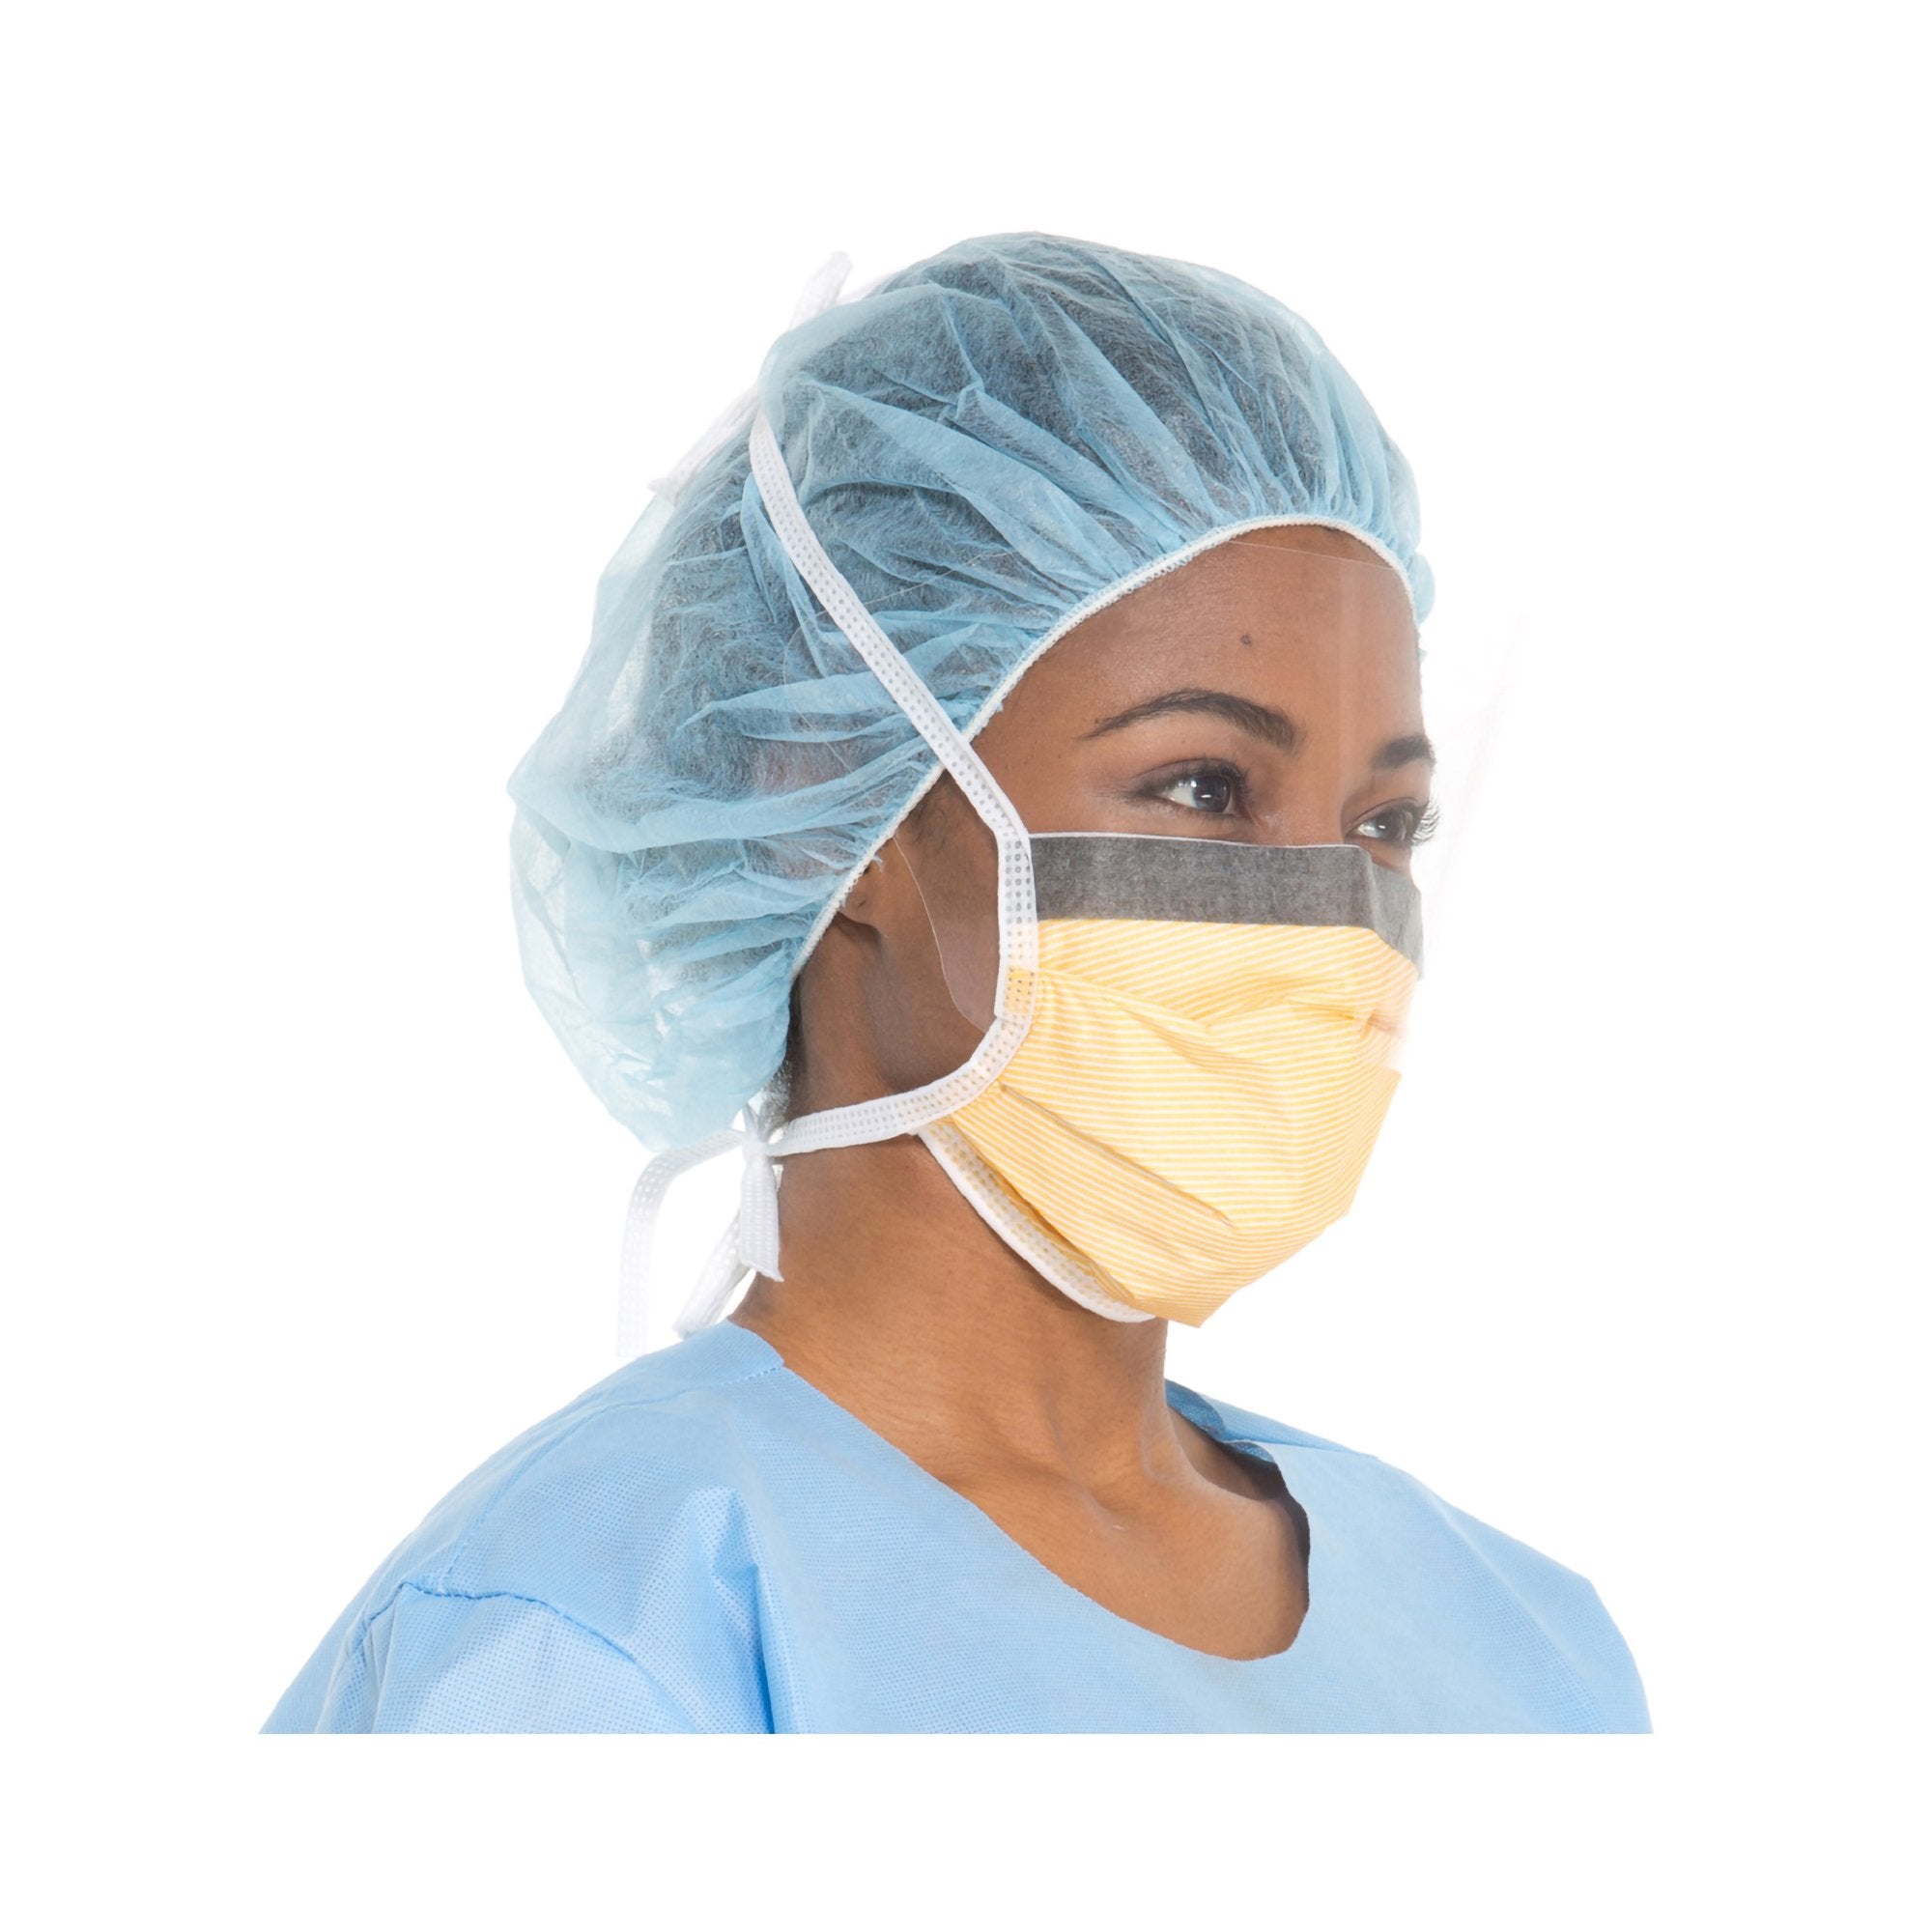 Surgical Mask with Eye Shield FluidShield Anti-fog Foam Pleated Tie Closure One Size Fits Most Orange NonSterile ASTM Level 3 Adult